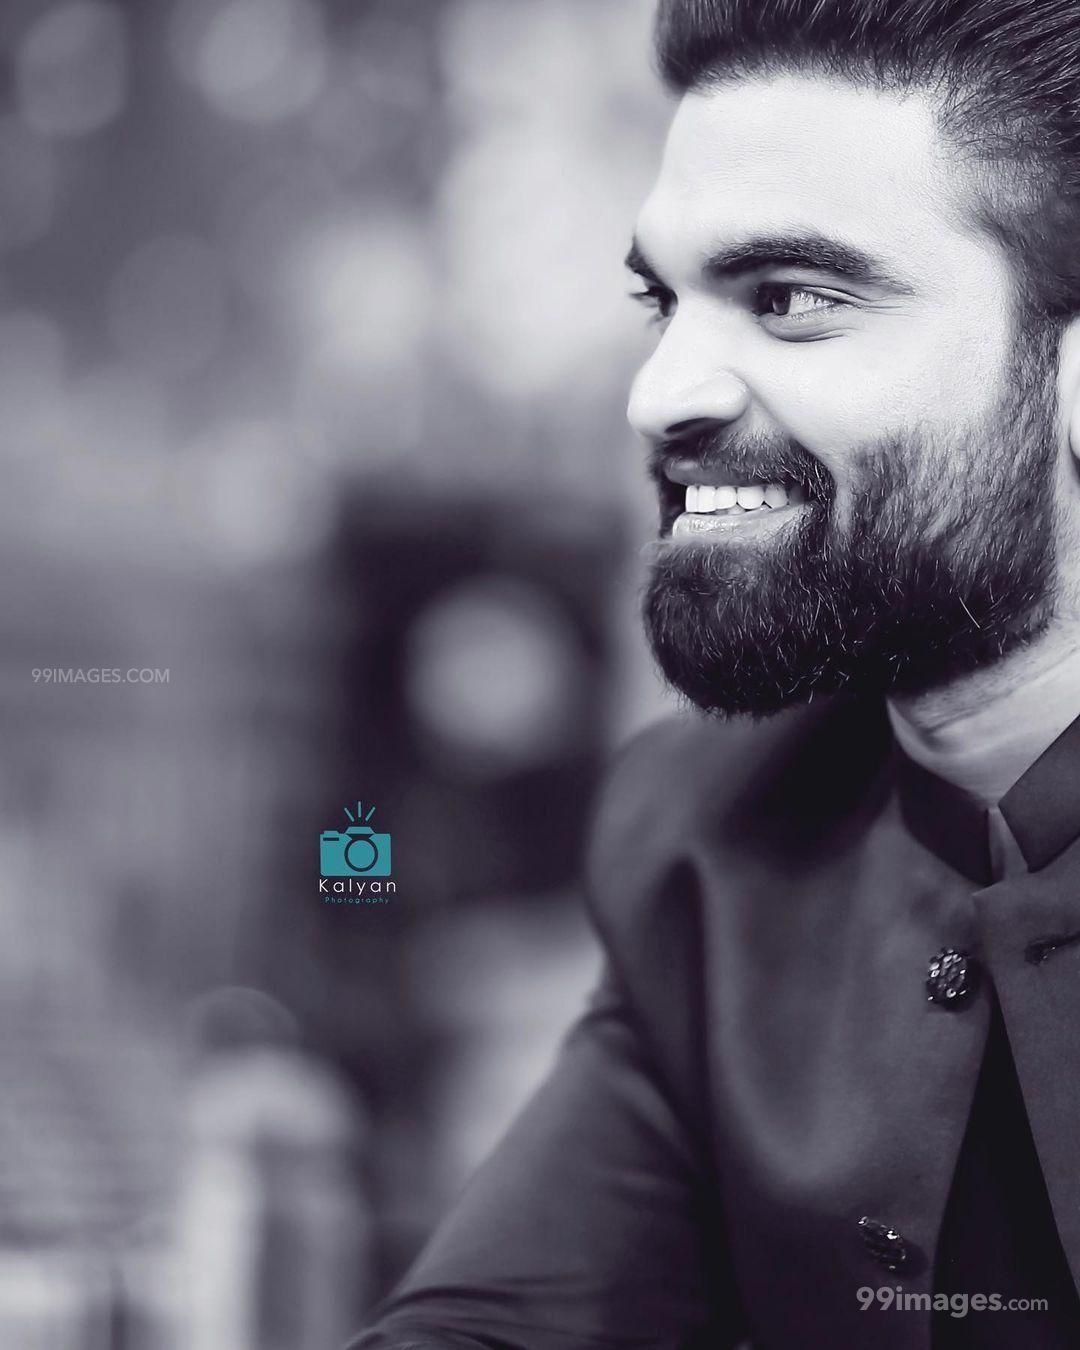 Pradeep Machiraju disappoints with his debut film  klapboardpost Pradeep  Machiraju disappoints with his debut film